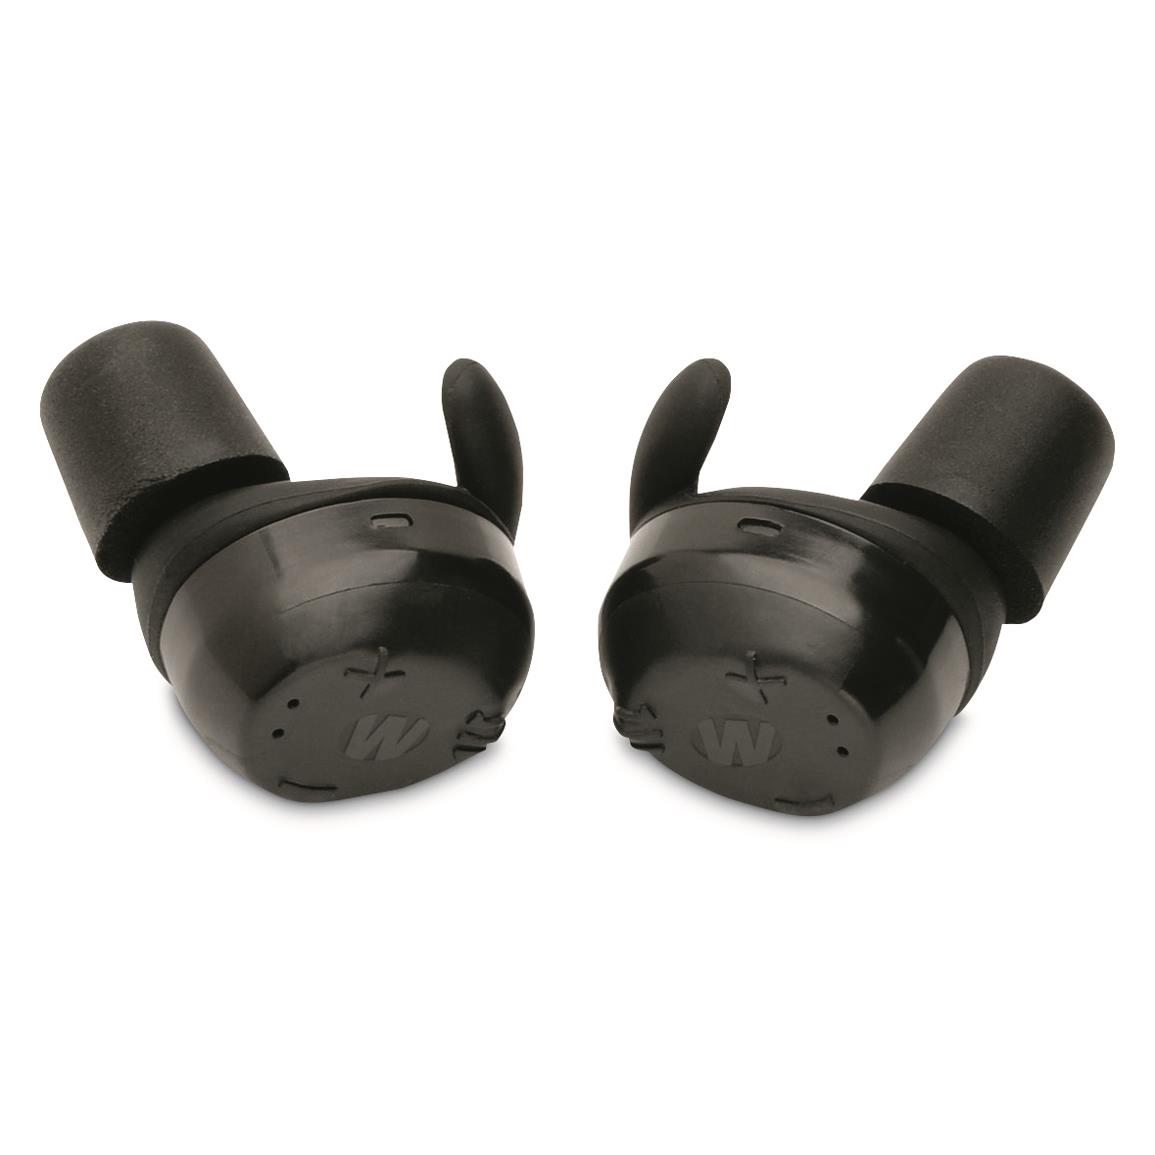 Walker's Silencer Bluetooth 2.0 Electronic Earbuds, NRR 24dB 716885, Hearing  Protection at Sportsman's Guide